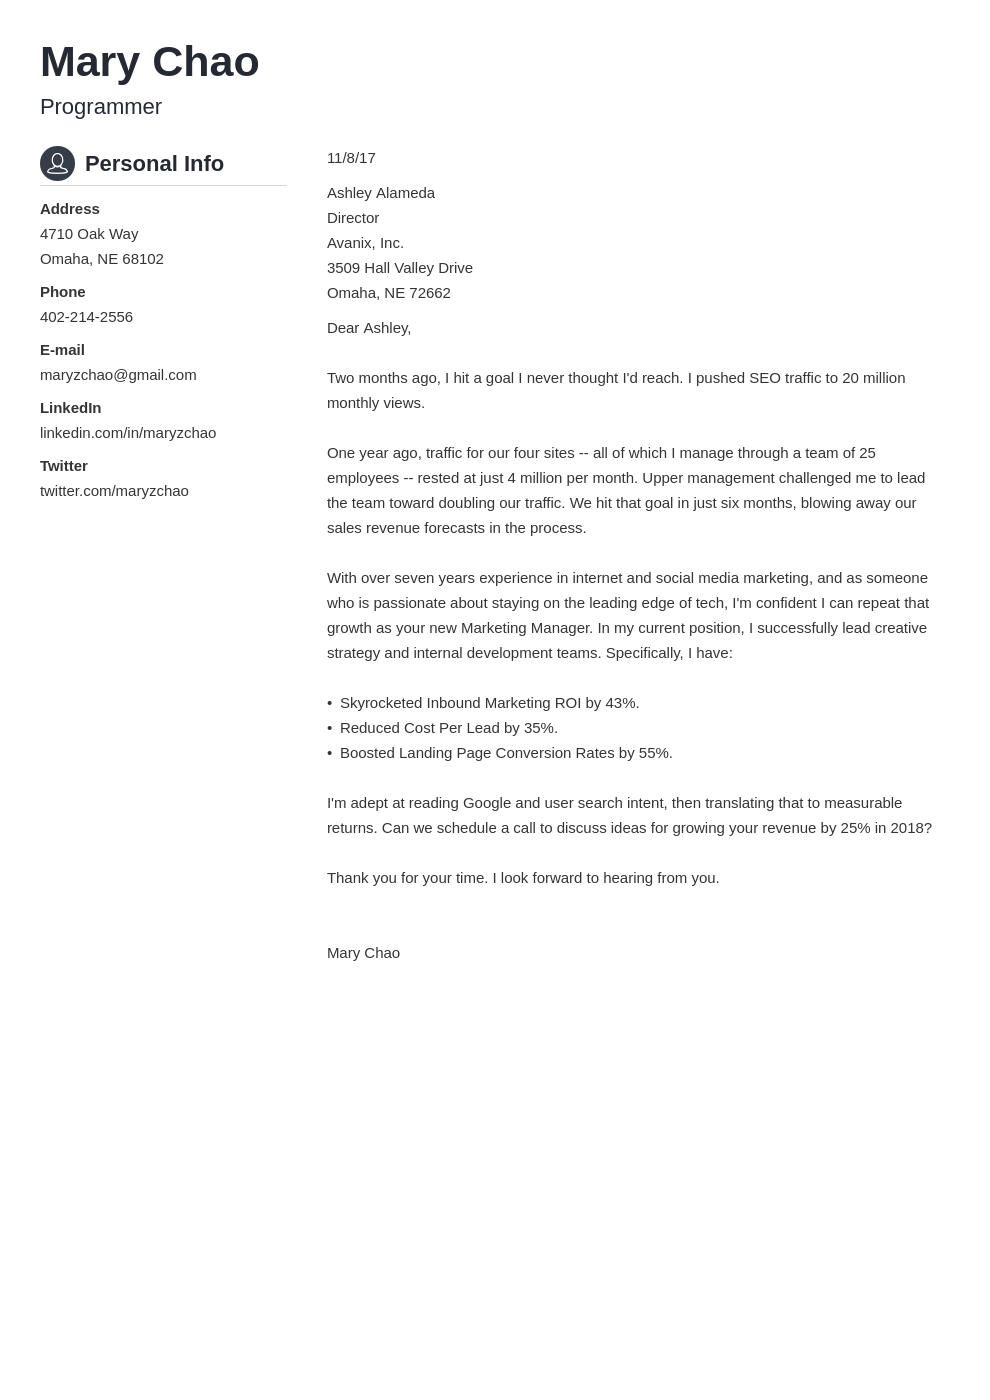 How To Format A Cover Letter In 2021 20 Proper Examples